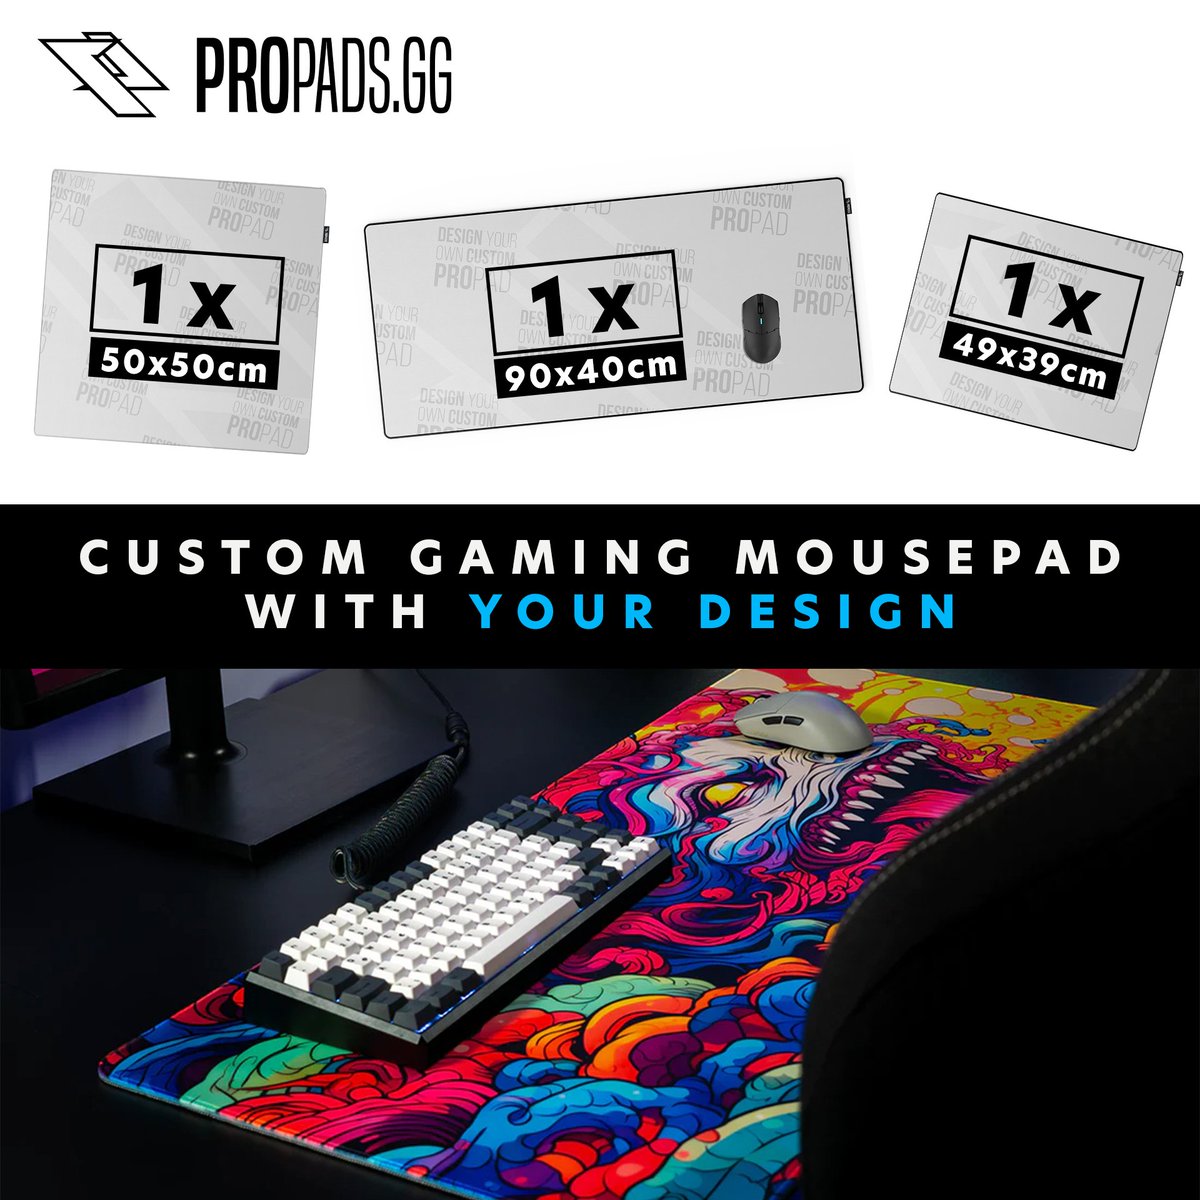 WIN A CUSTOM GAMING MOUSEPAD! Take part in the PROPADS #Giveaway and have the chance to win one of 3 custom mousepads. You can participate via the following link: ▶️ gheed.com/giveaways/g-YB…